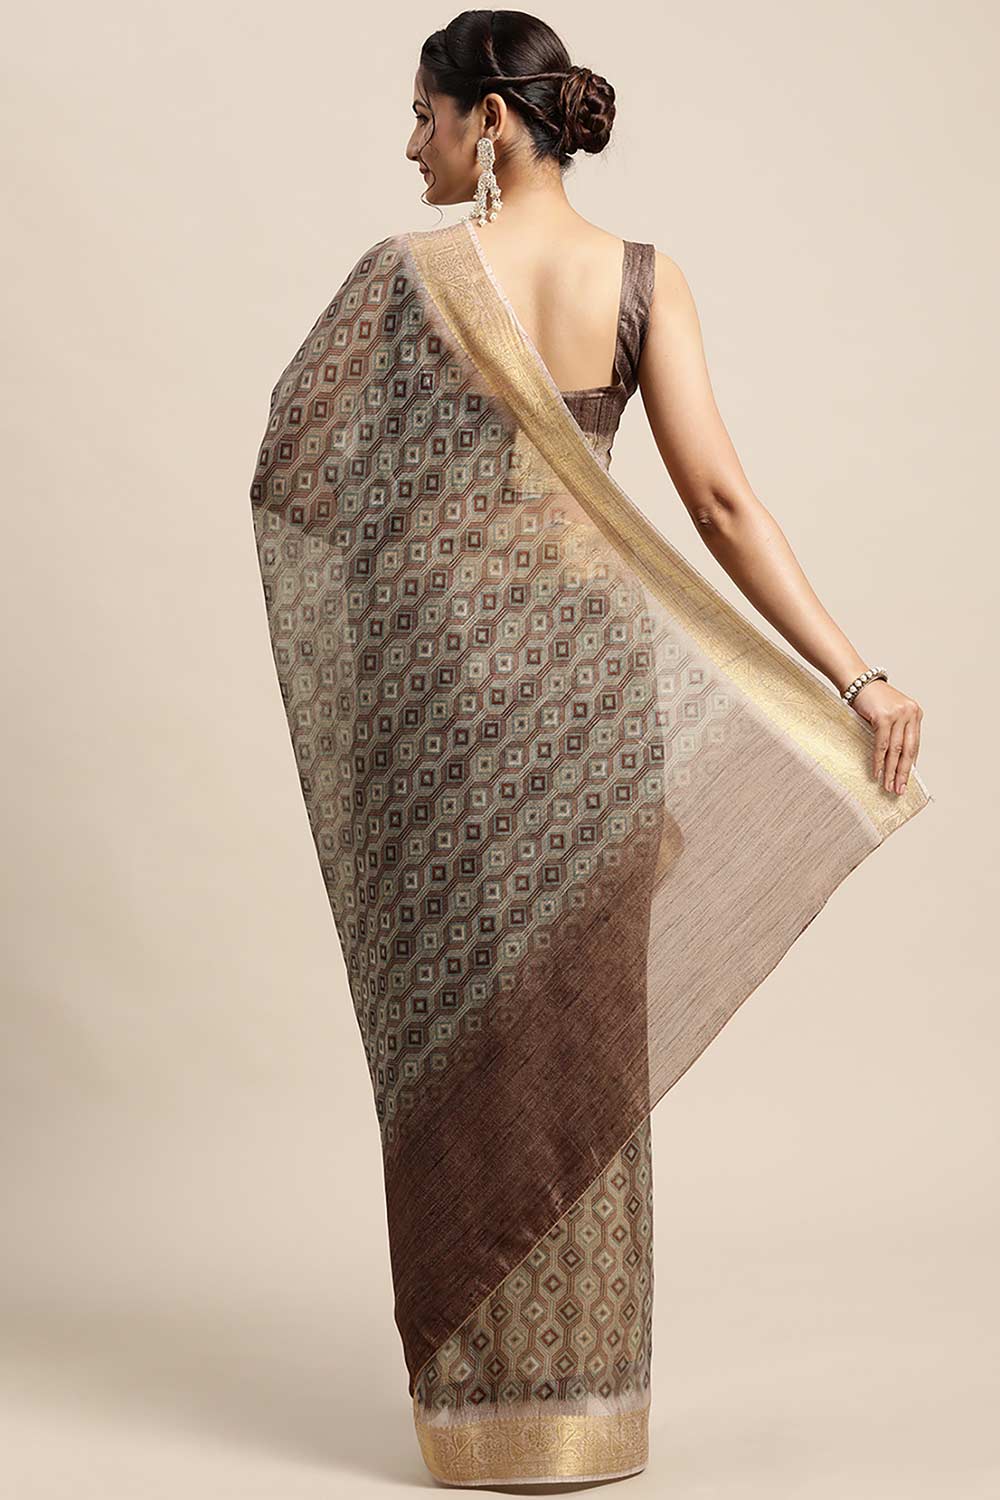 Shop Paula Cotton Blend Brown Digital Print One Minute Saree at best offer at our  Store - One Minute Saree